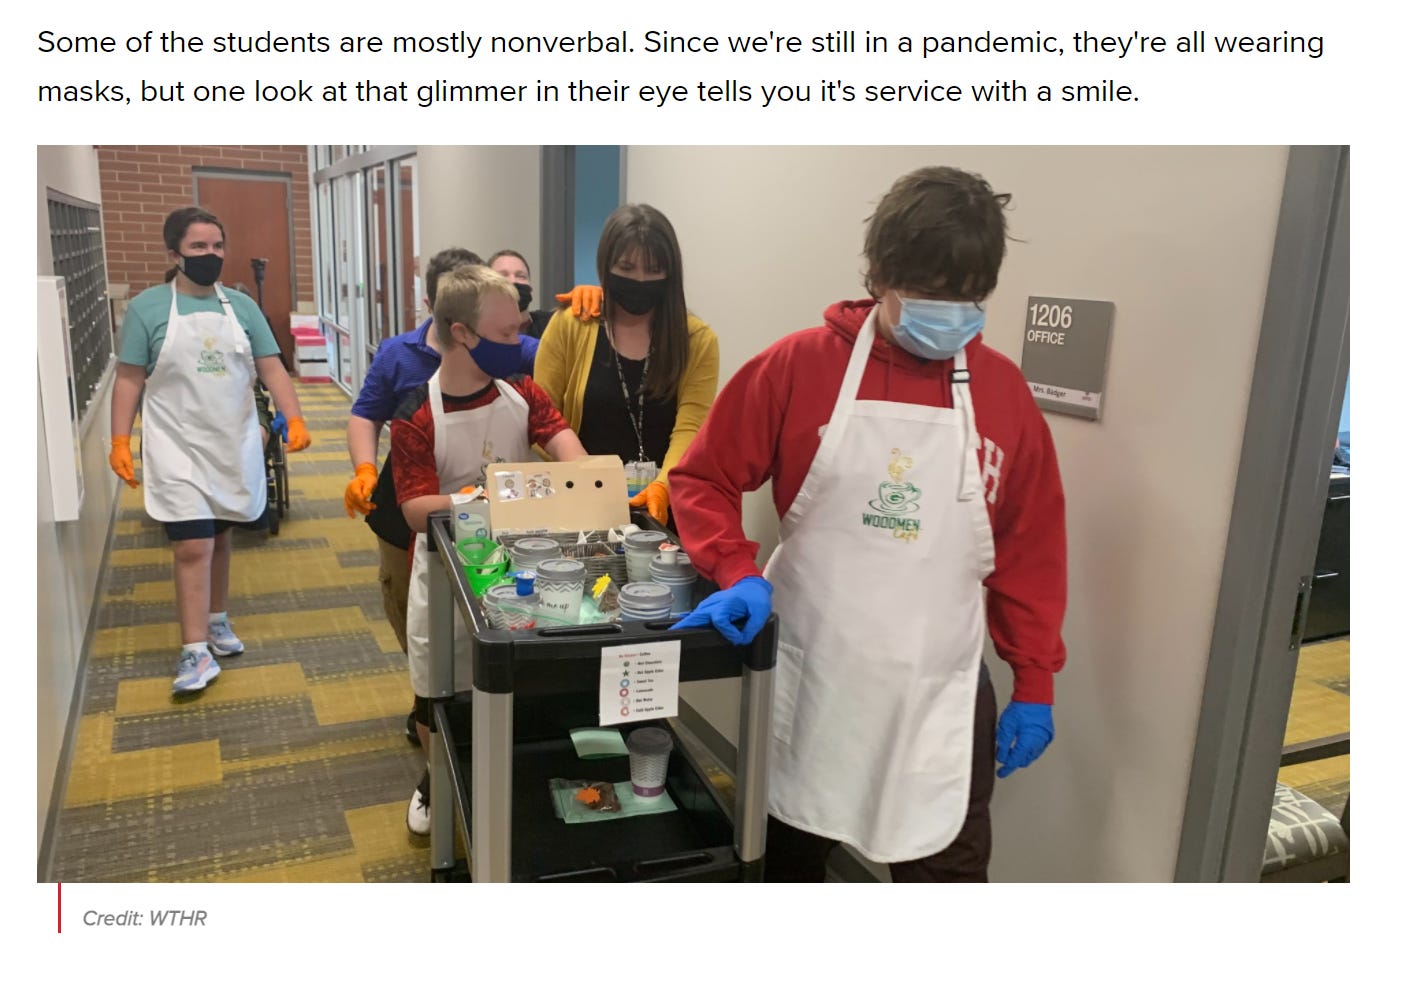 [image] students walking down an office hallway with a cart of coffee and treats for school staff, students are wearing aprons with a Woodmen cafe logo as well as facemasks; text reads: Some of the students are mostly nonverbal. Since we’re still in a pandemic, they’re all wearing masks, but one look at that glimmer in their eye tells you it’s service with a smile